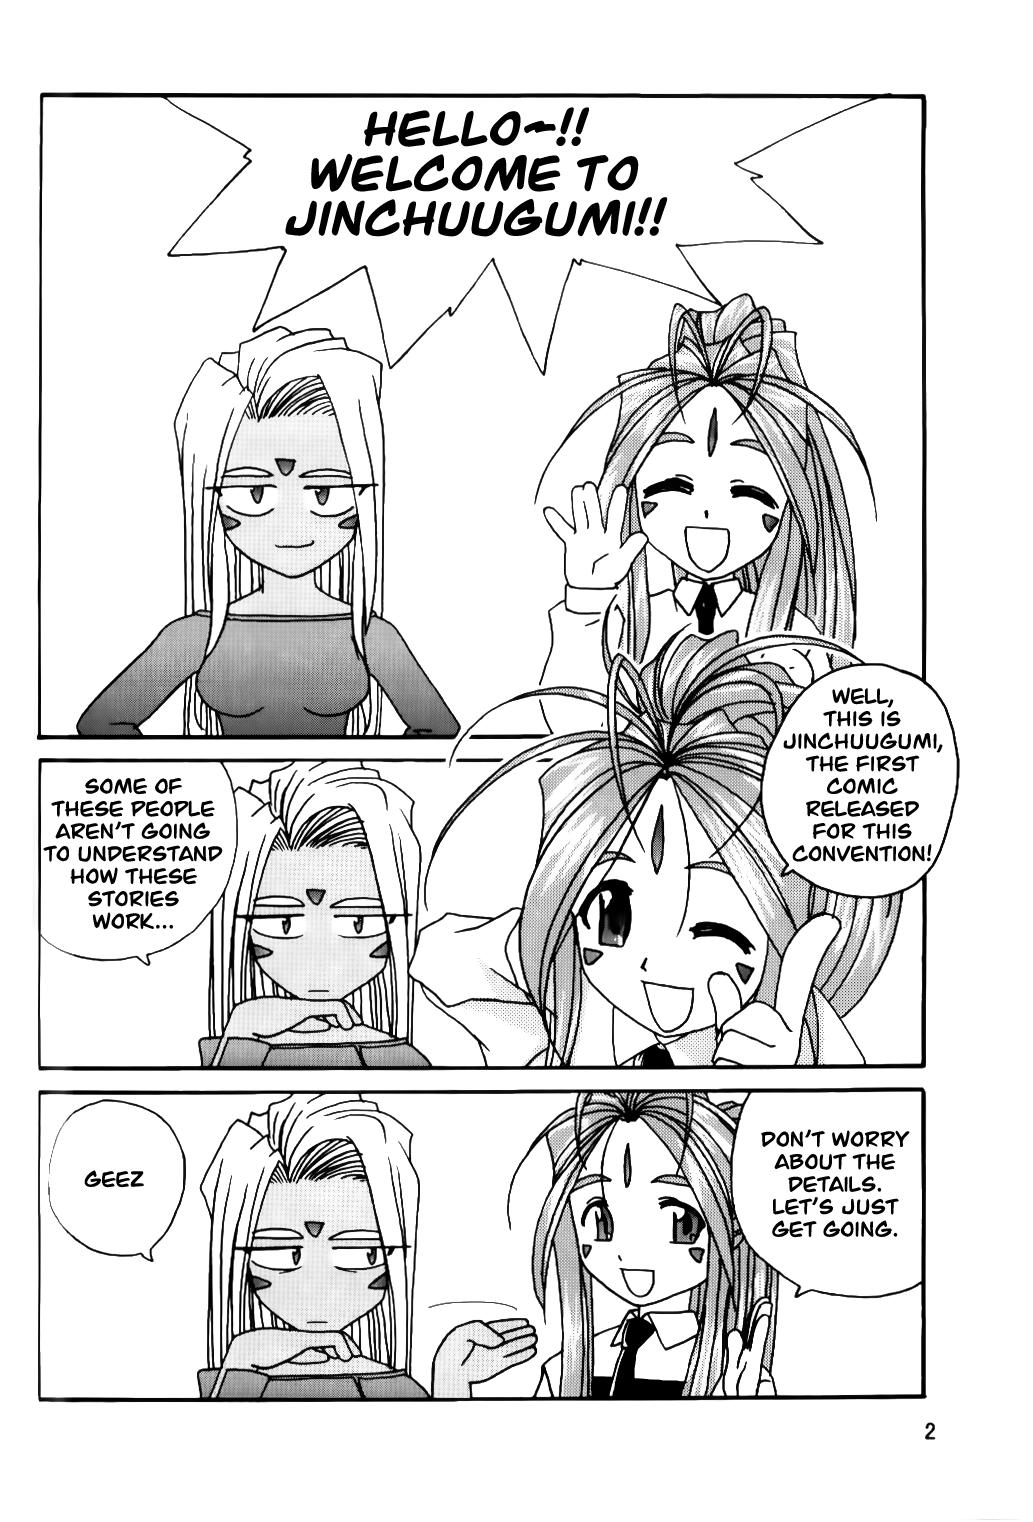 Office IF 2000 - Ah my goddess Satin - Page 4